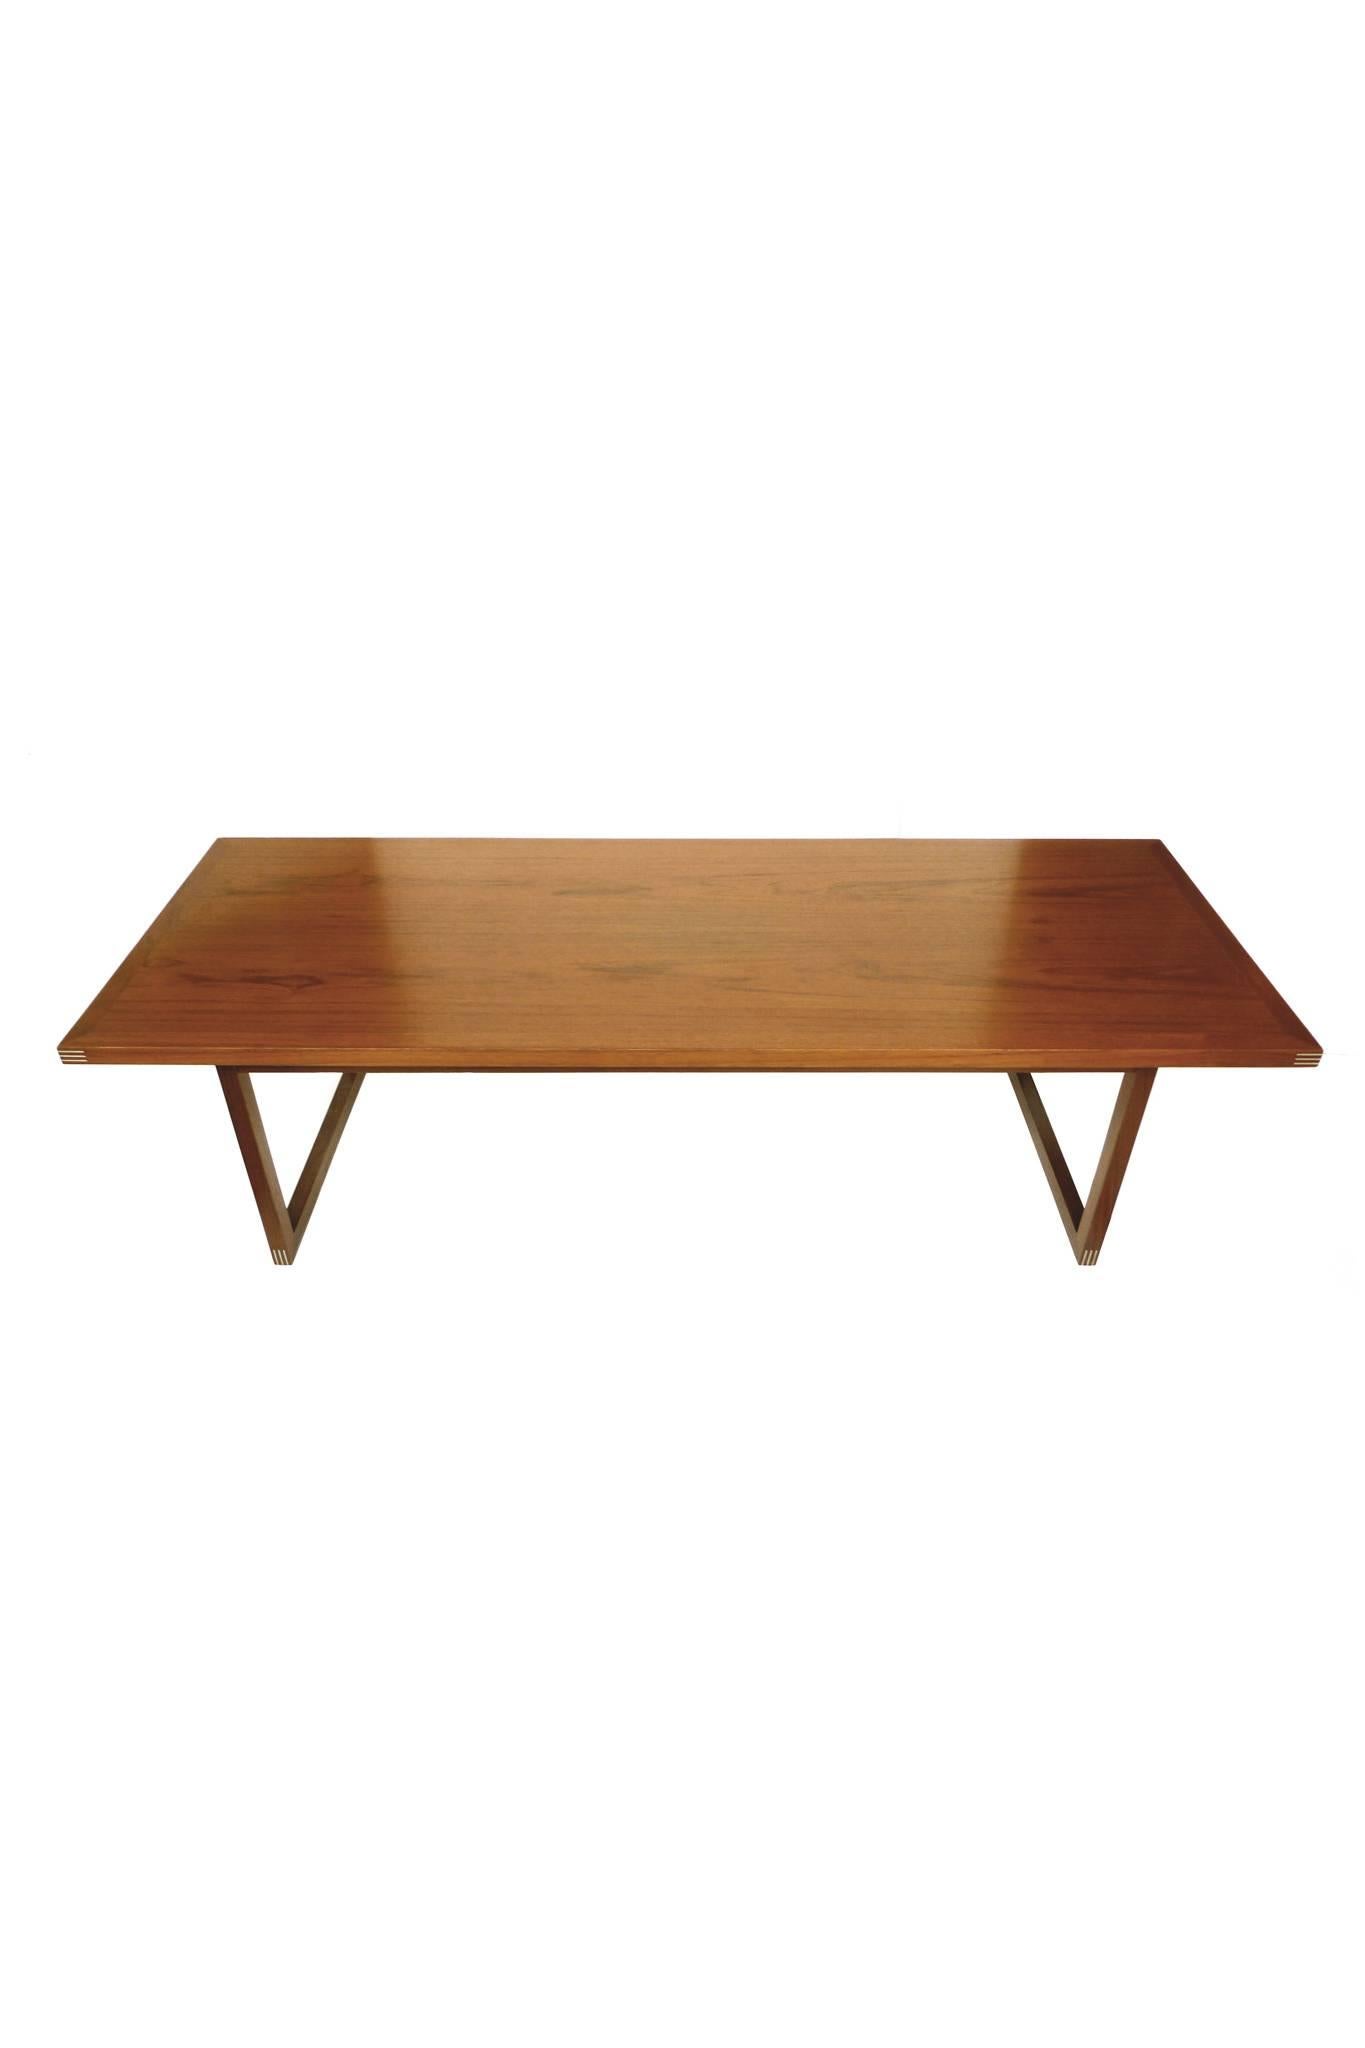 This Danish teak coffee table is designed by Rud Thygesen for Heltborg Møbler. It consists of a one inch-thick top beautifully supported by streamlined sleigh legs. This dynamic design is complemented by metal inlays that adorn the edges. The table